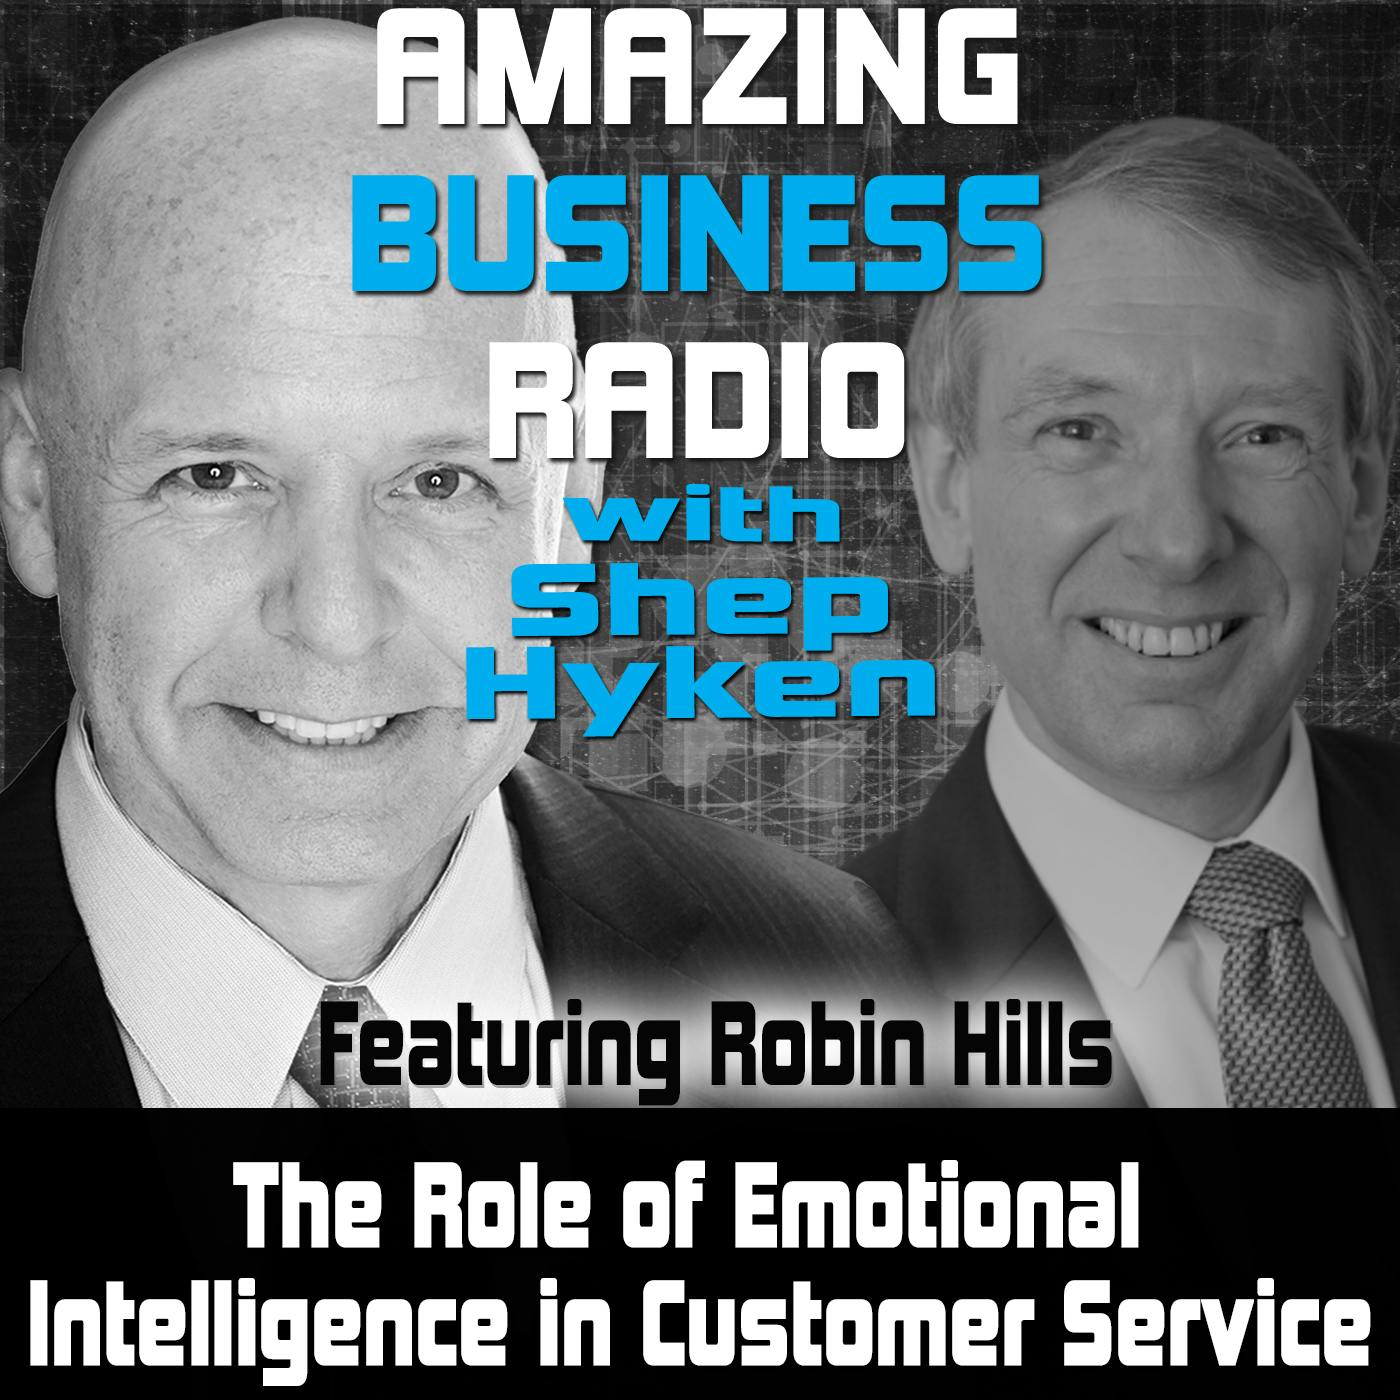 The Role of Emotional Intelligence in Customer Service Featuring Robin Hills